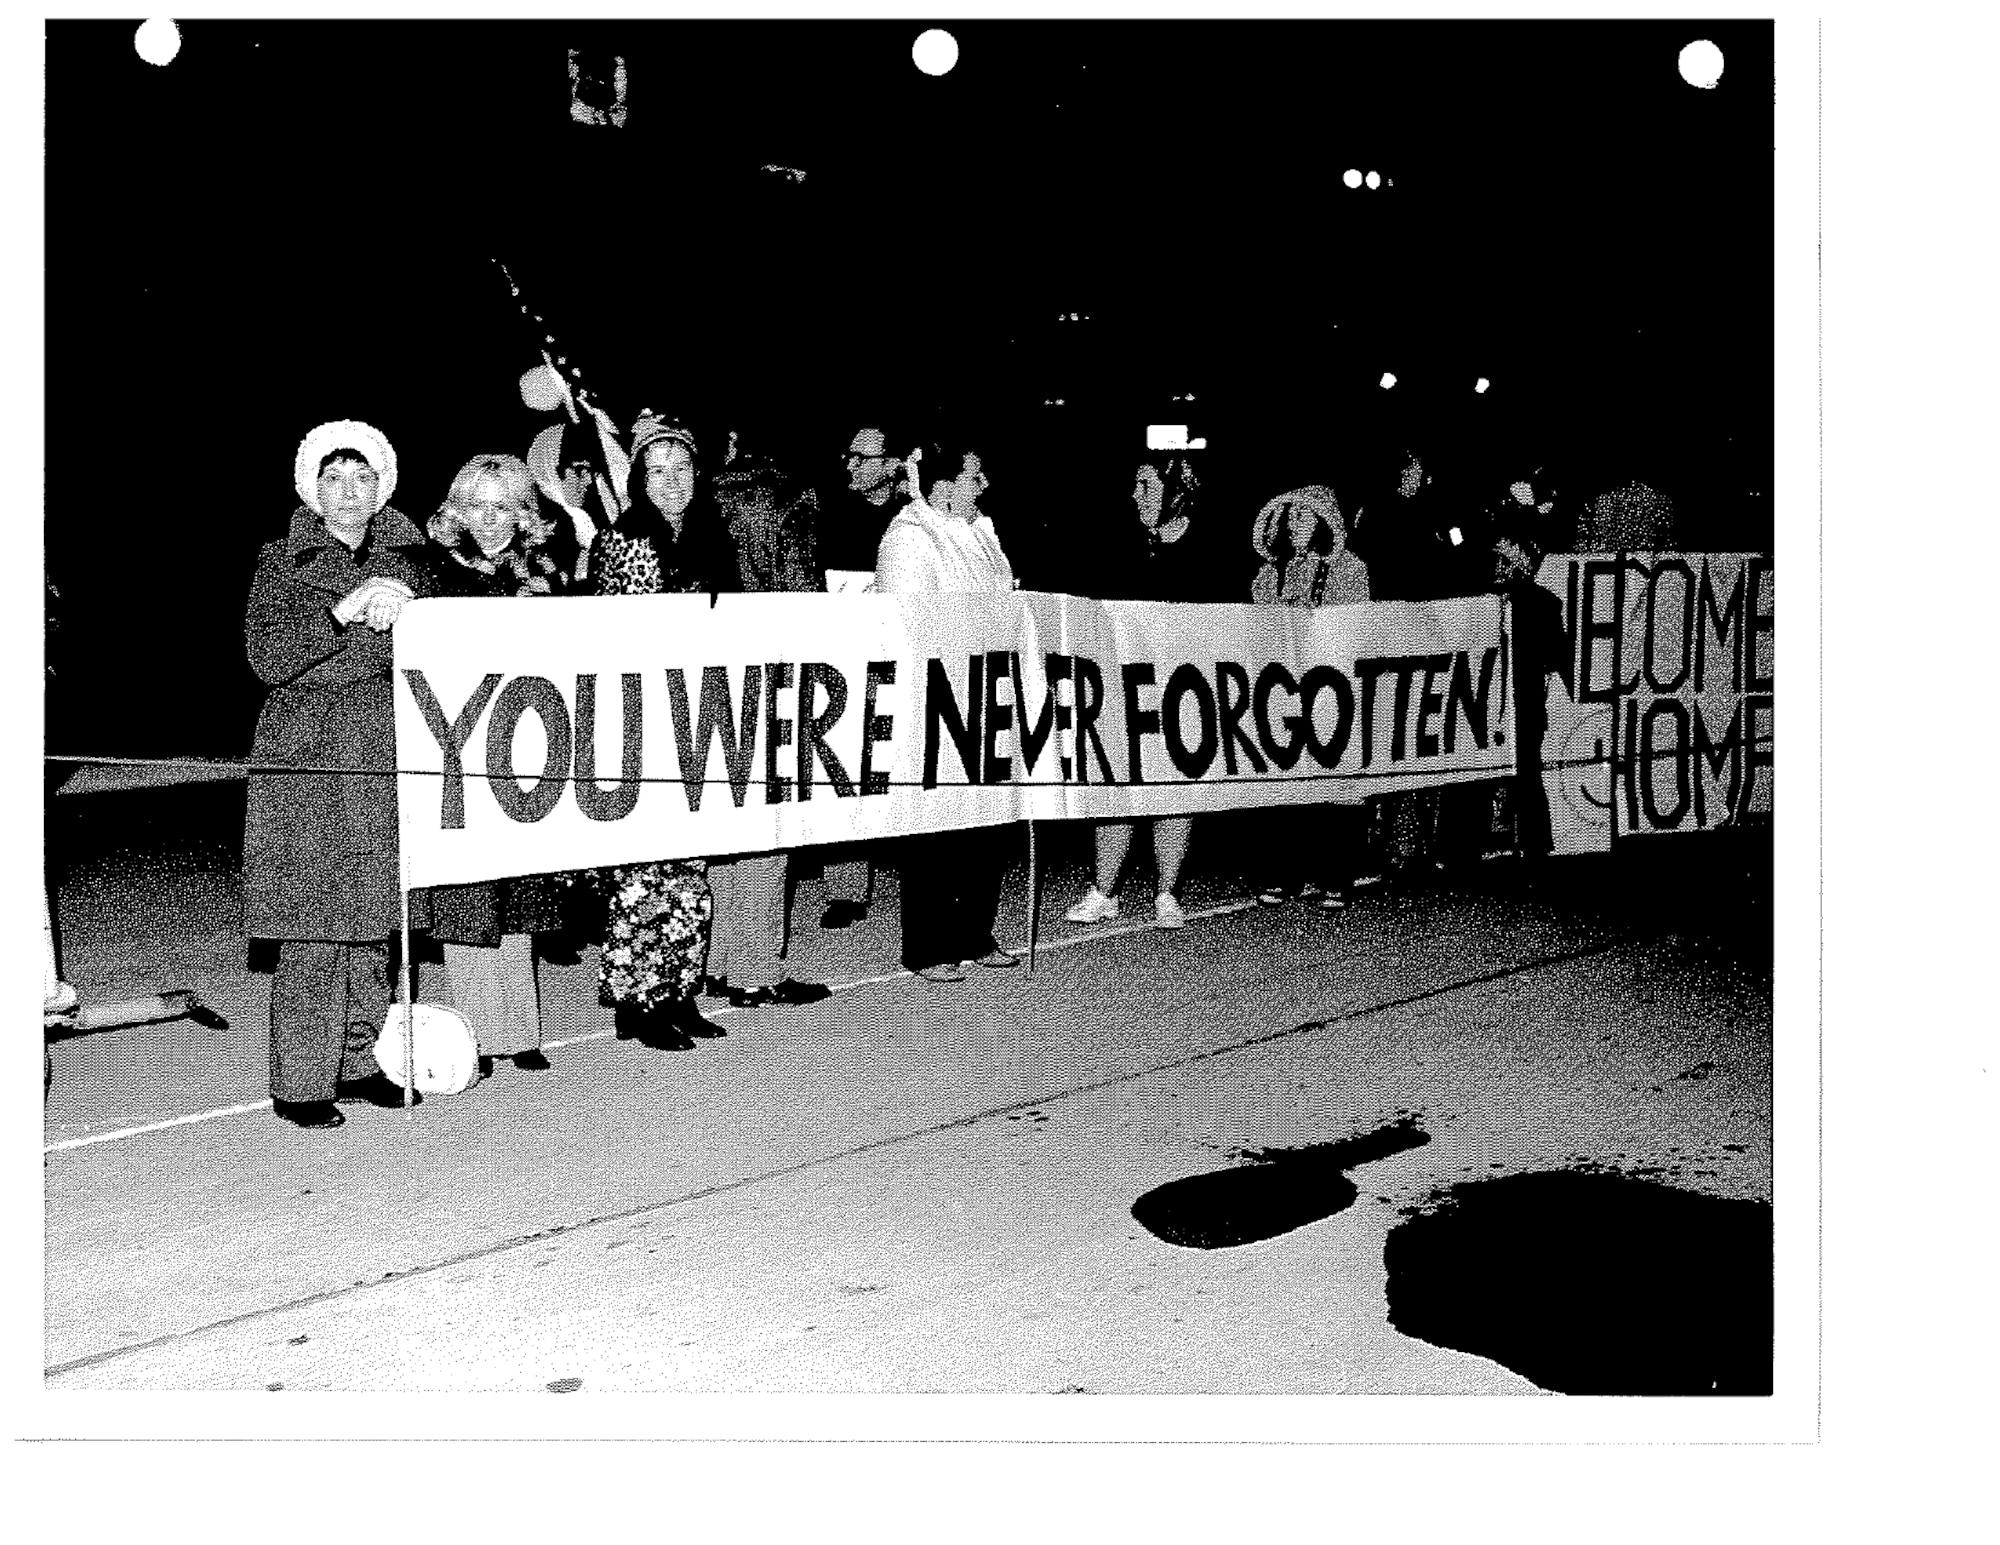 Banners, flags, and signs carried by persons greeting the returnees were evidence of the emotions involved in Operation Homecoming. “You Were Never Forgotten” was one message conveyed to ex-POWs arriving at Scott Air Force Base.